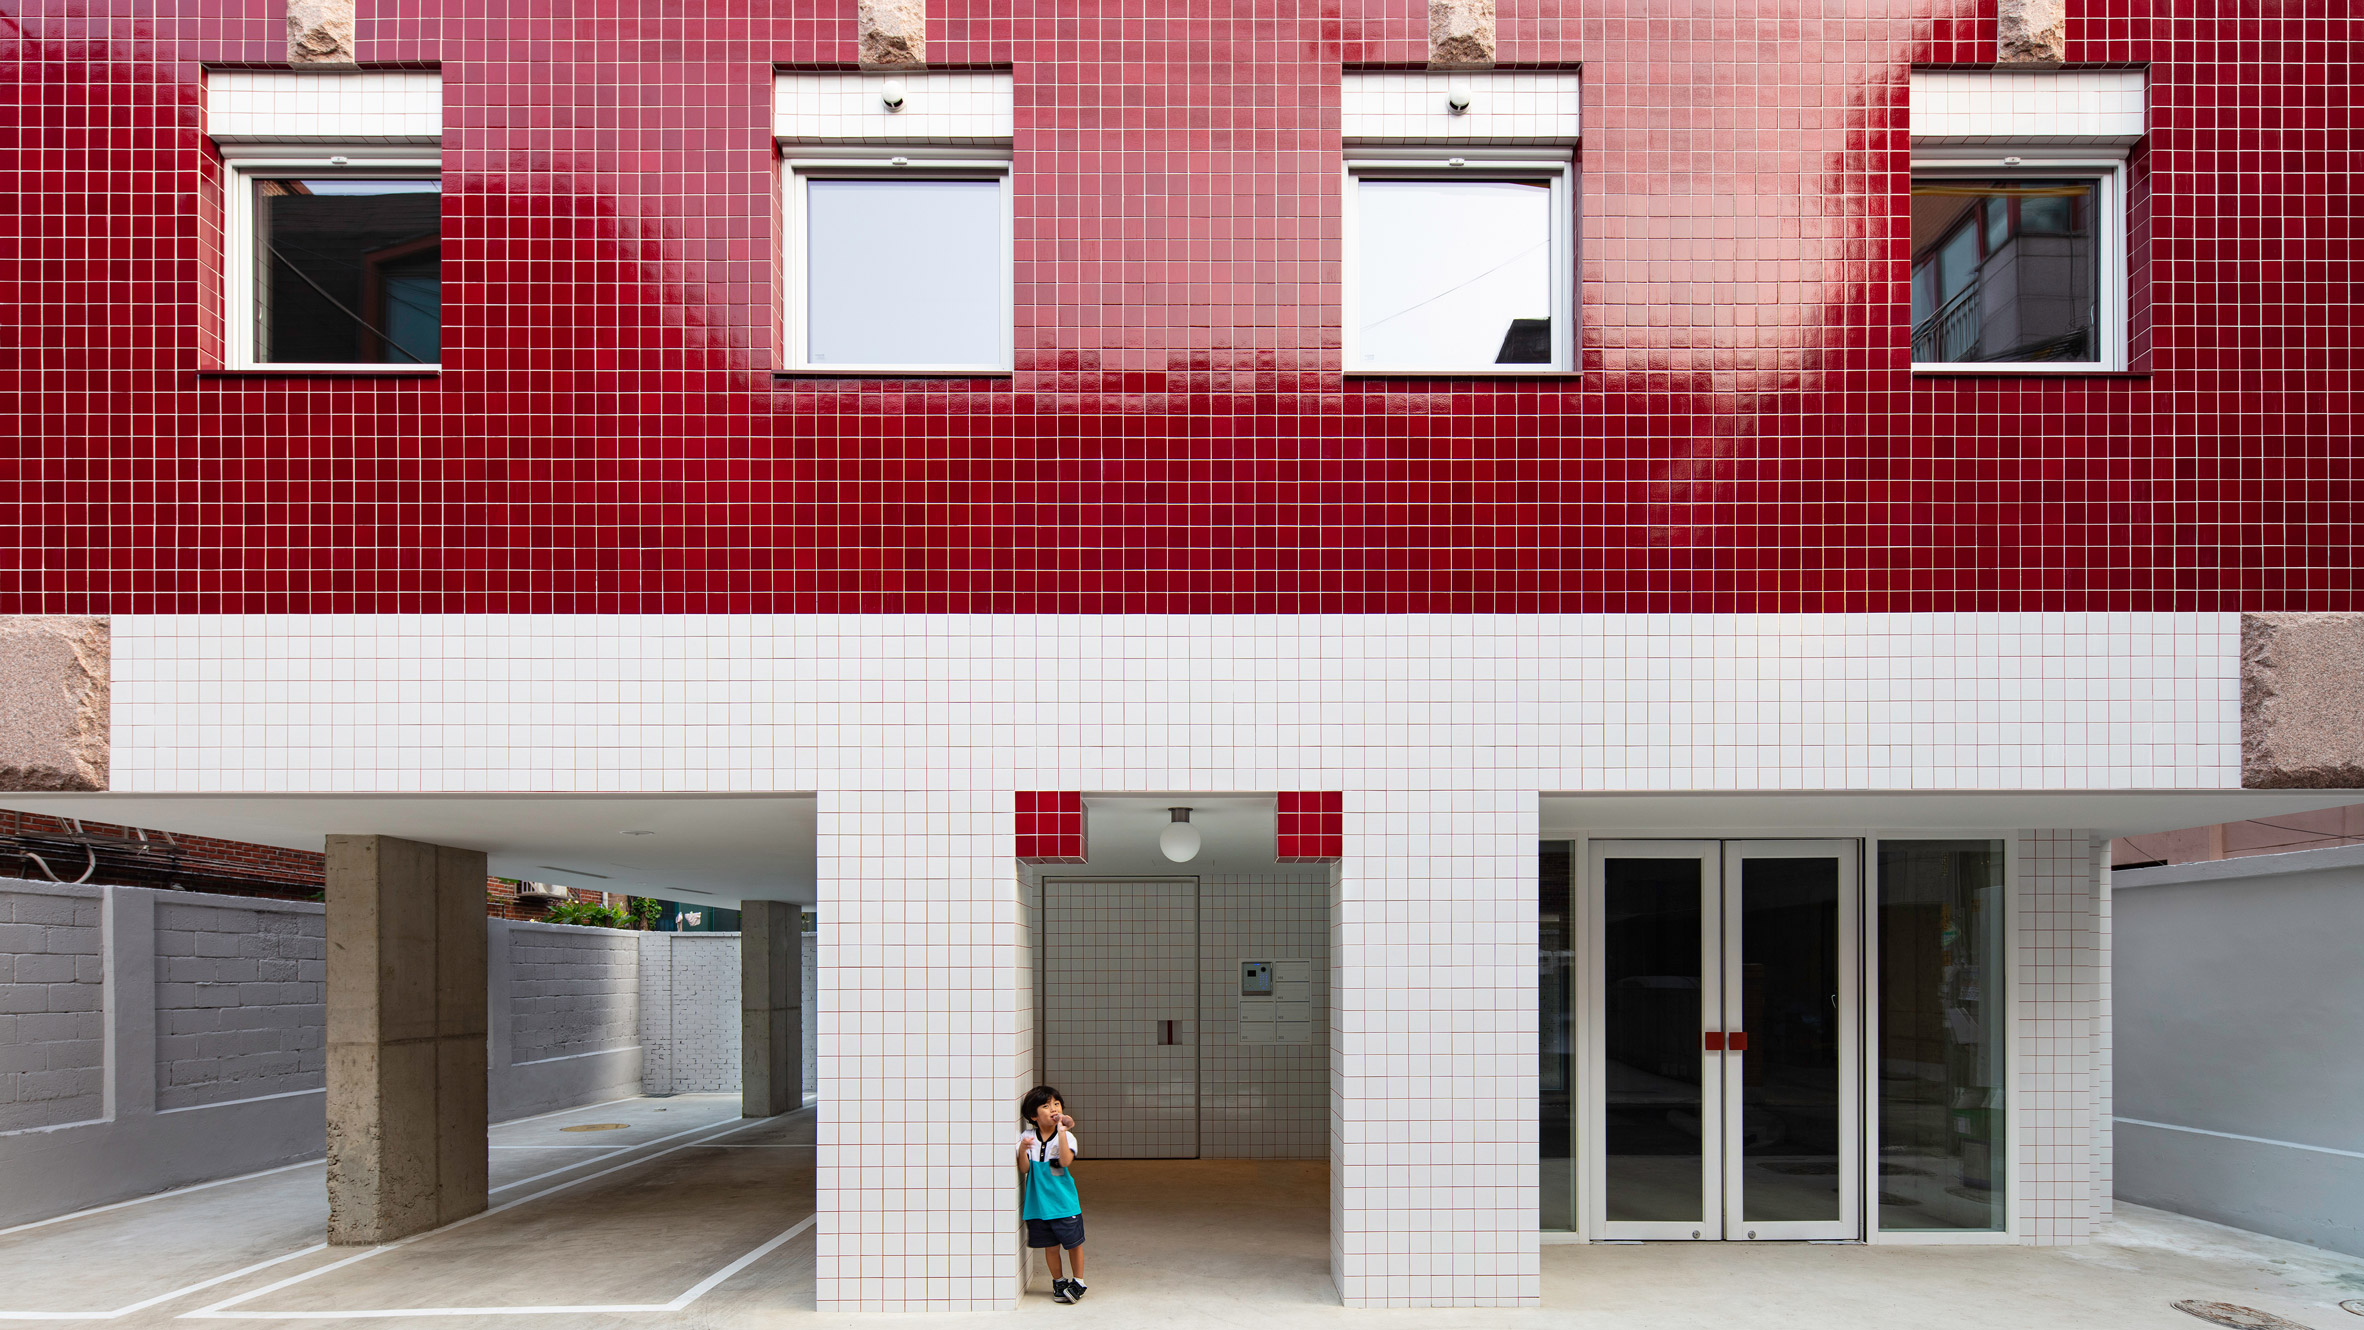 Aoa Architects Clads Minecraft Themed Apartments With Pixel Like Tiles